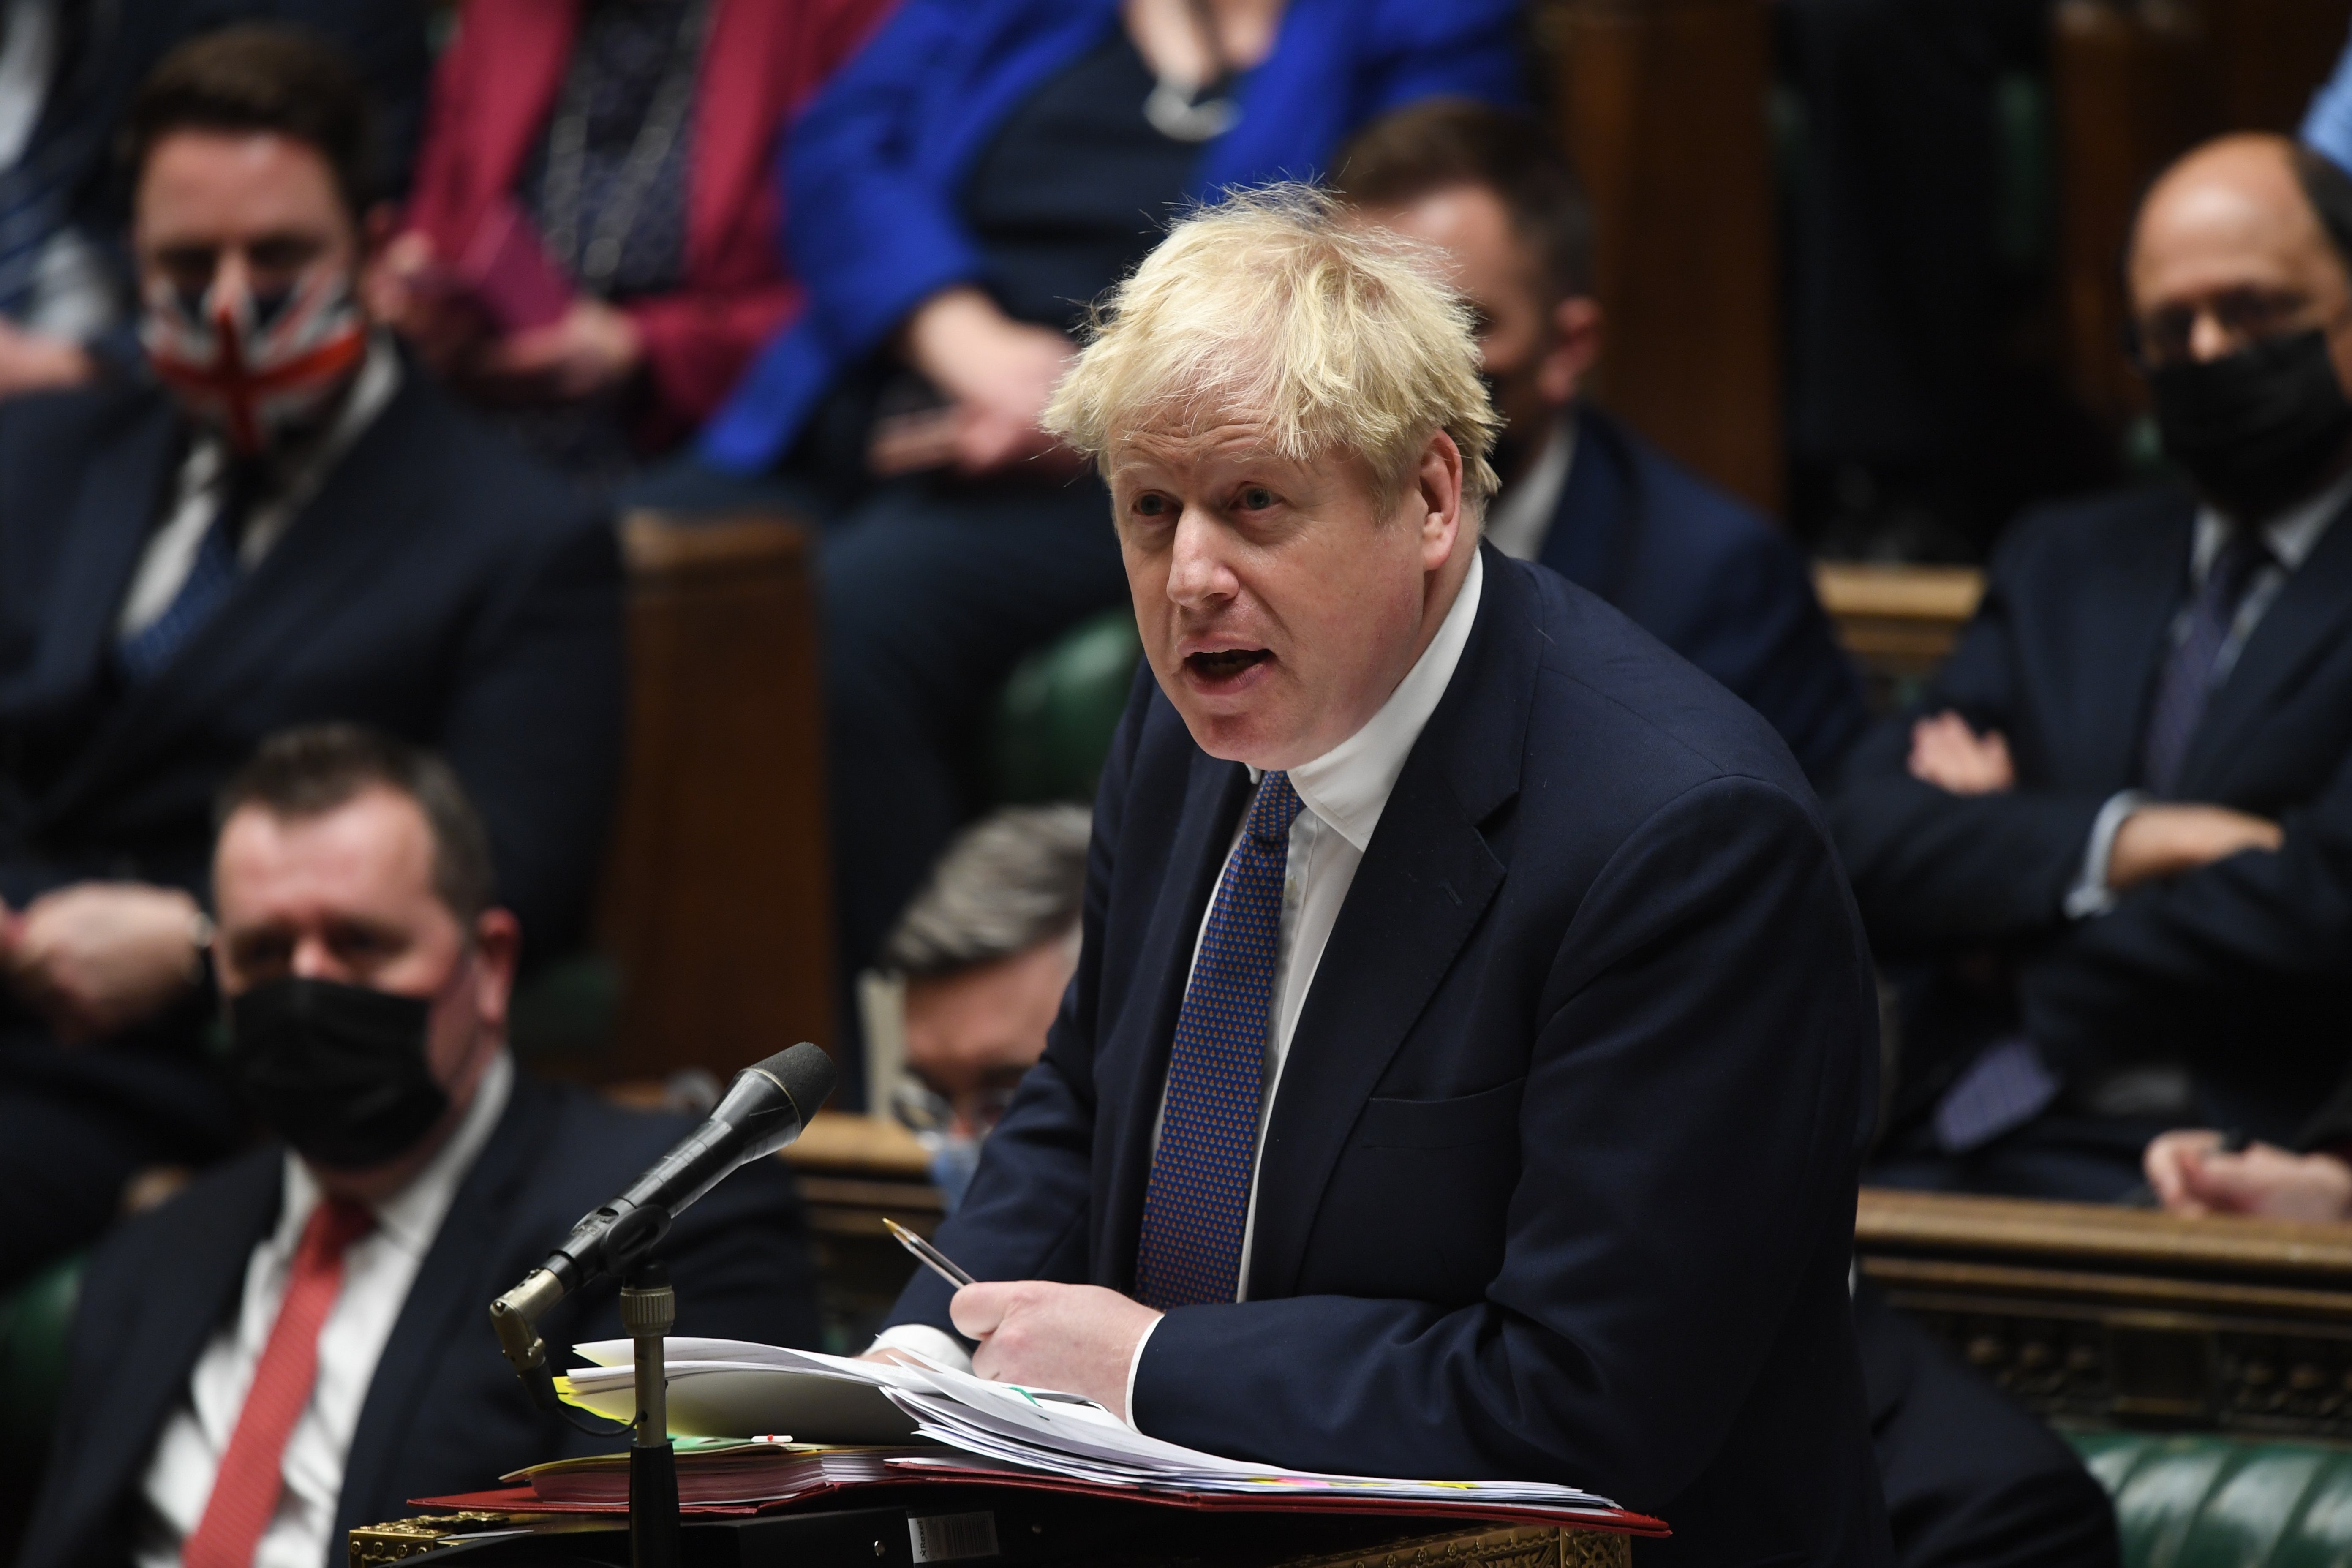 Handout photo issued by UK Parliament of Prime Minister Boris Johnson speaking during Prime Minister’s Questions. (UK Parliament/Jessica Taylor)